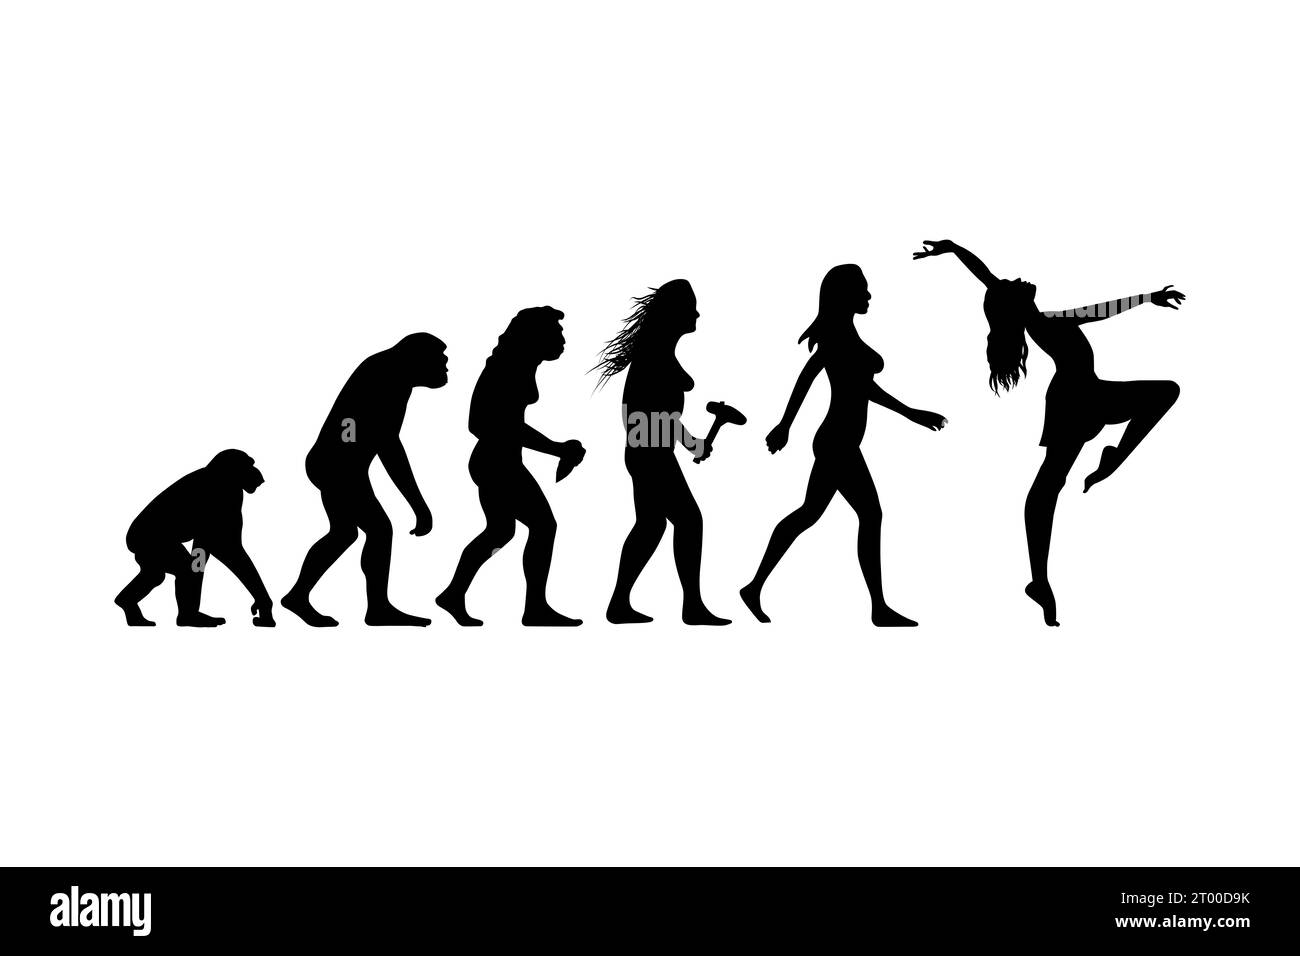 The Charles Darwin's theory of evolution can be metaphorically applied to dance in a creative way to explore the evolution of dance forms and styles o Stock Photo